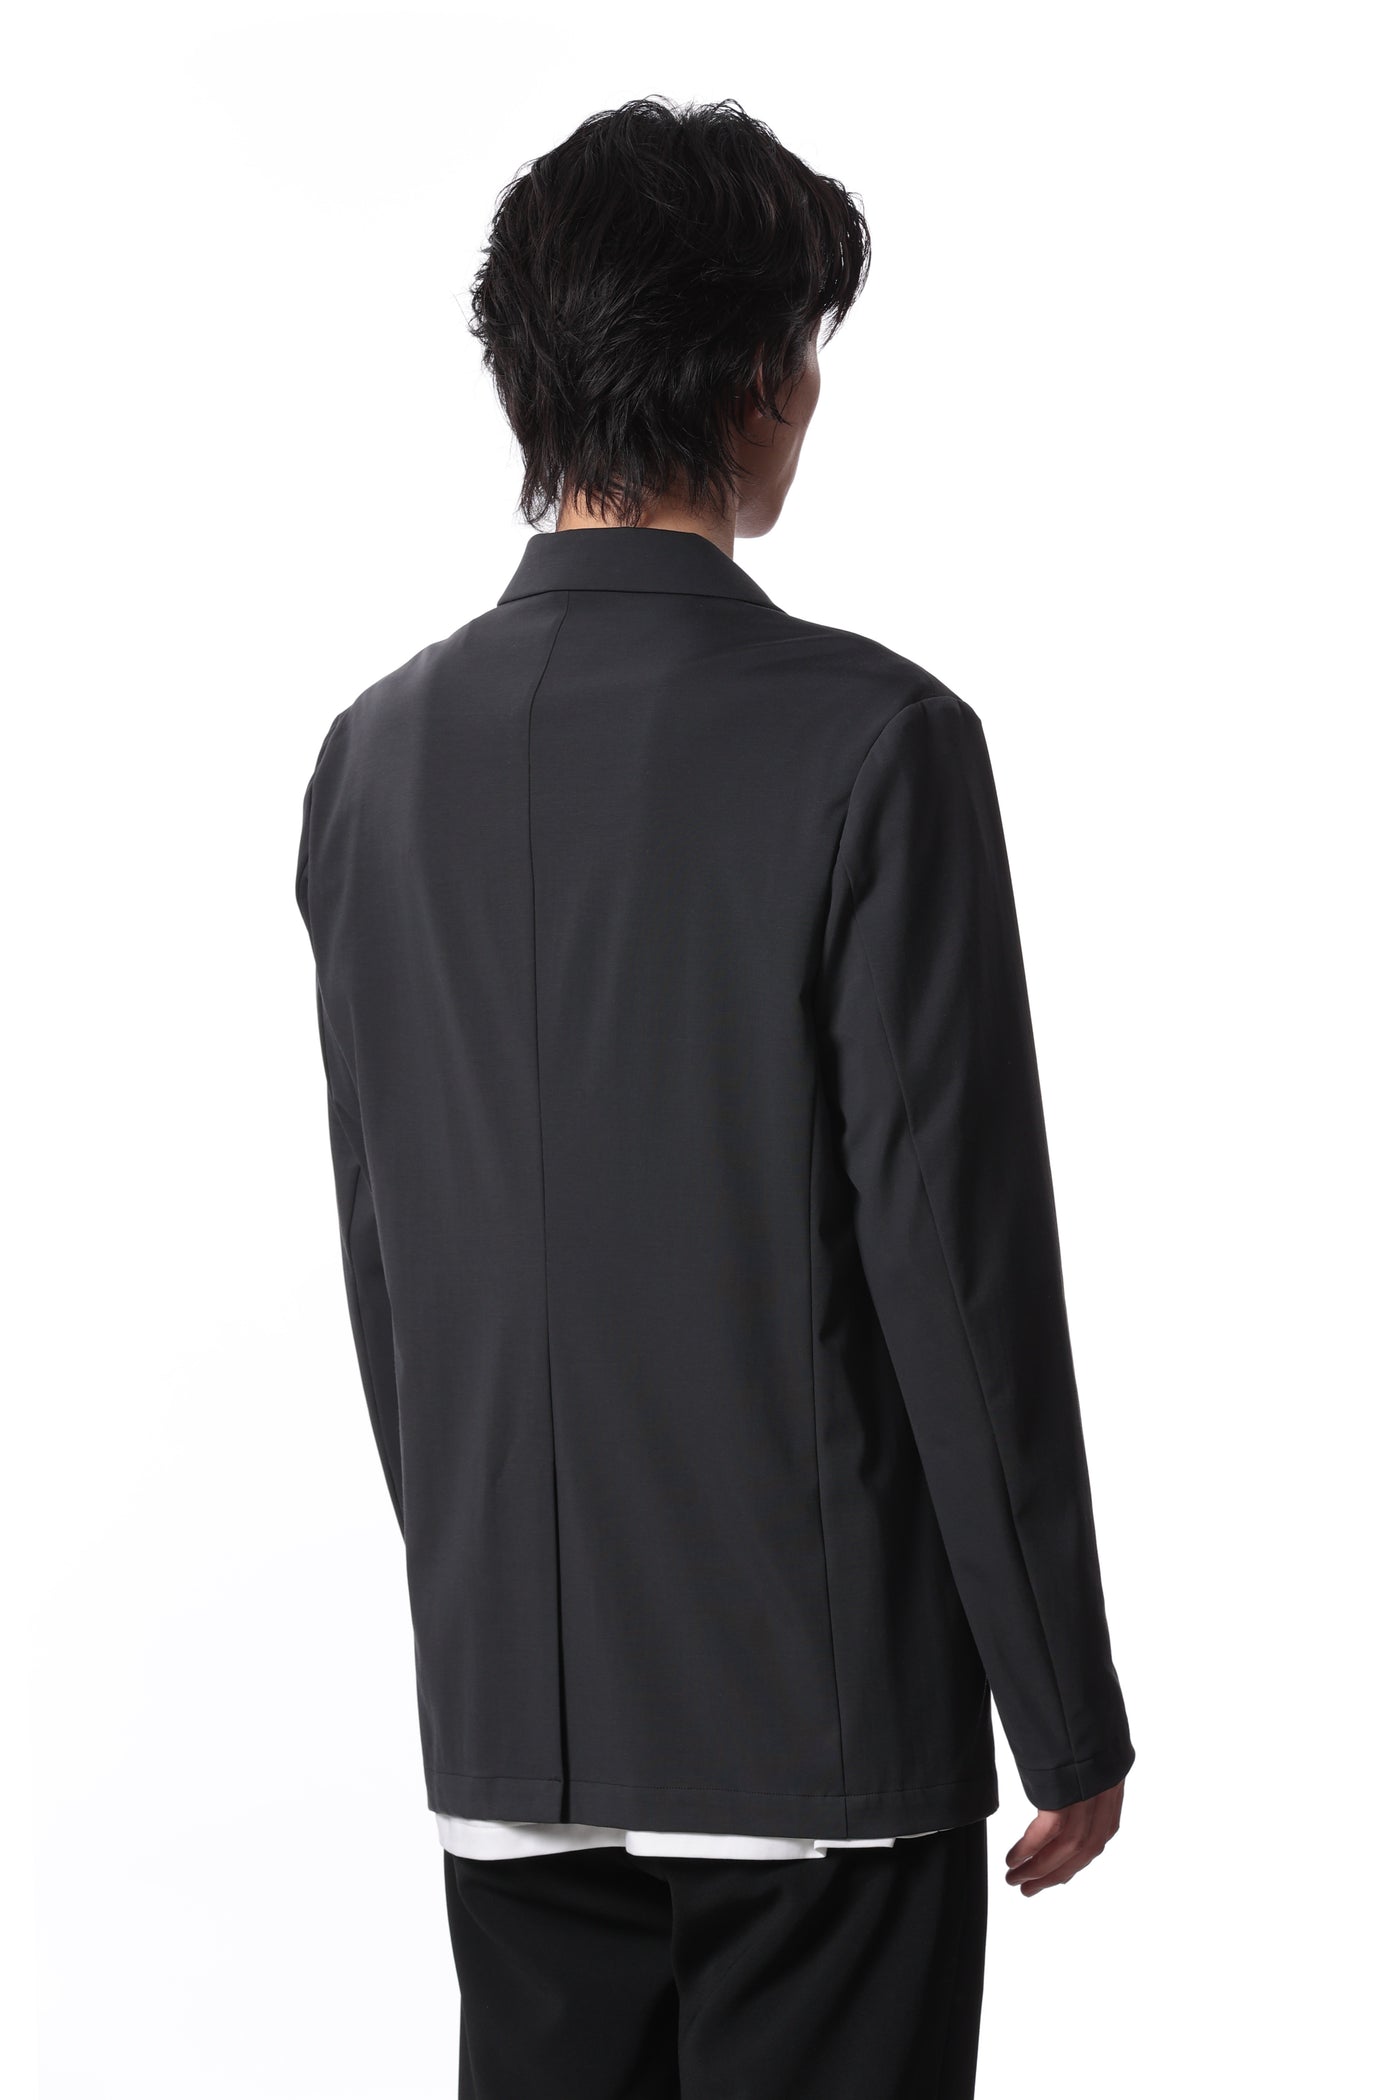 Released in February AG41-019 Nylon/Cotton Stretch Jersey 2B Tailored Jacket